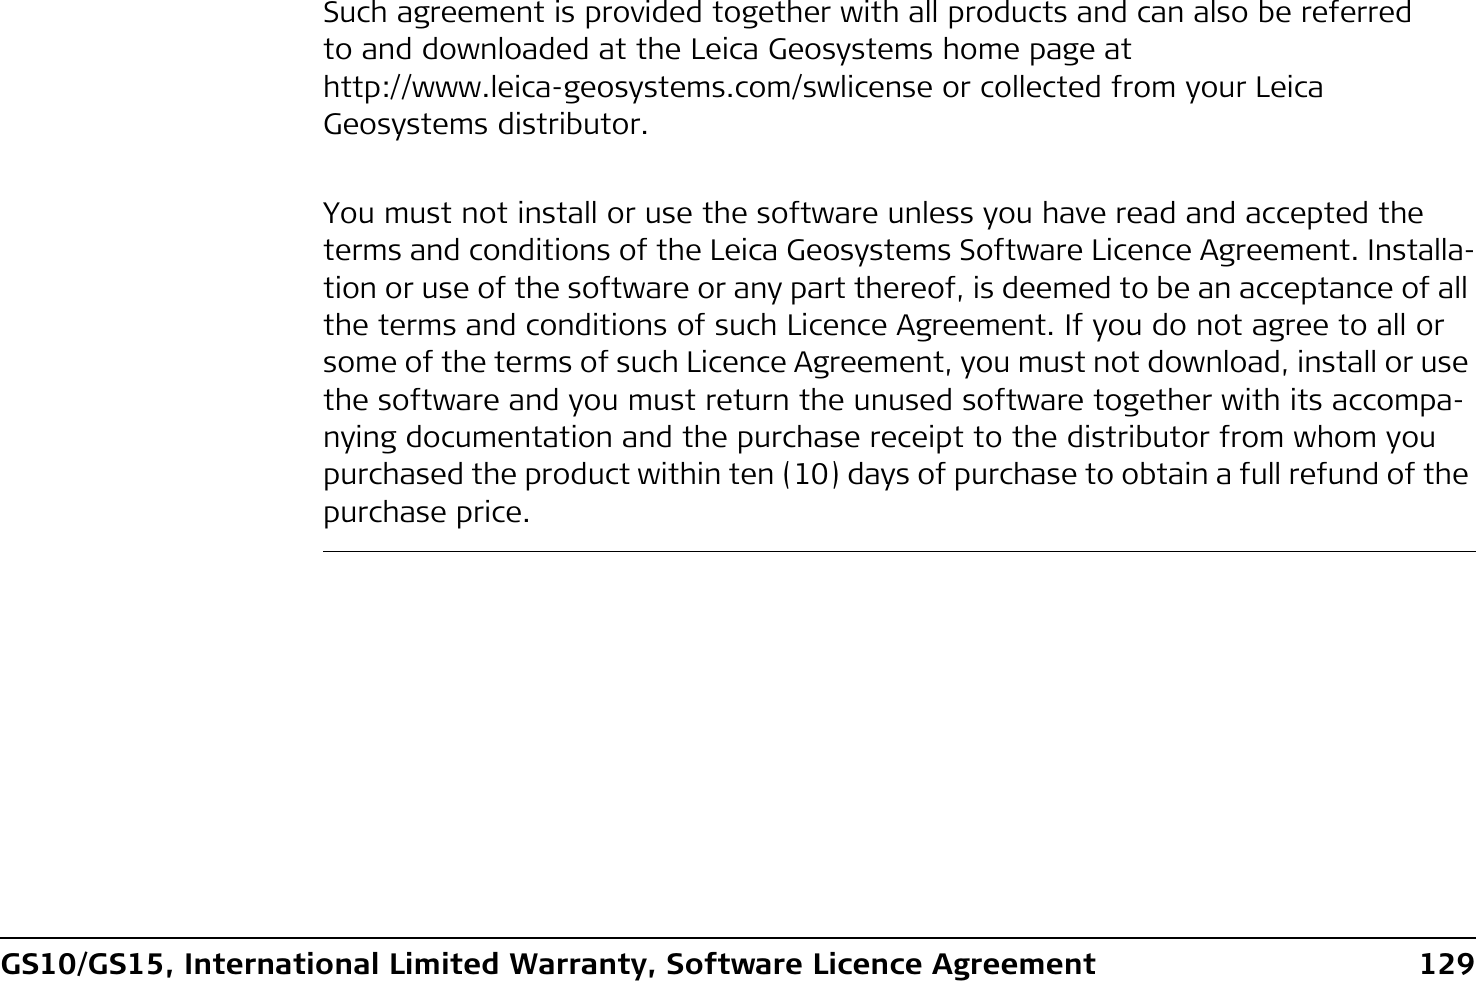 GS10/GS15, International Limited Warranty, Software Licence Agreement 129Such agreement is provided together with all products and can also be referred to and downloaded at the Leica Geosystems home page at http://www.leica-geosystems.com/swlicense or collected from your Leica Geosystems distributor.You must not install or use the software unless you have read and accepted the terms and conditions of the Leica Geosystems Software Licence Agreement. Installa-tion or use of the software or any part thereof, is deemed to be an acceptance of all the terms and conditions of such Licence Agreement. If you do not agree to all or some of the terms of such Licence Agreement, you must not download, install or use the software and you must return the unused software together with its accompa-nying documentation and the purchase receipt to the distributor from whom you purchased the product within ten (10) days of purchase to obtain a full refund of the purchase price.